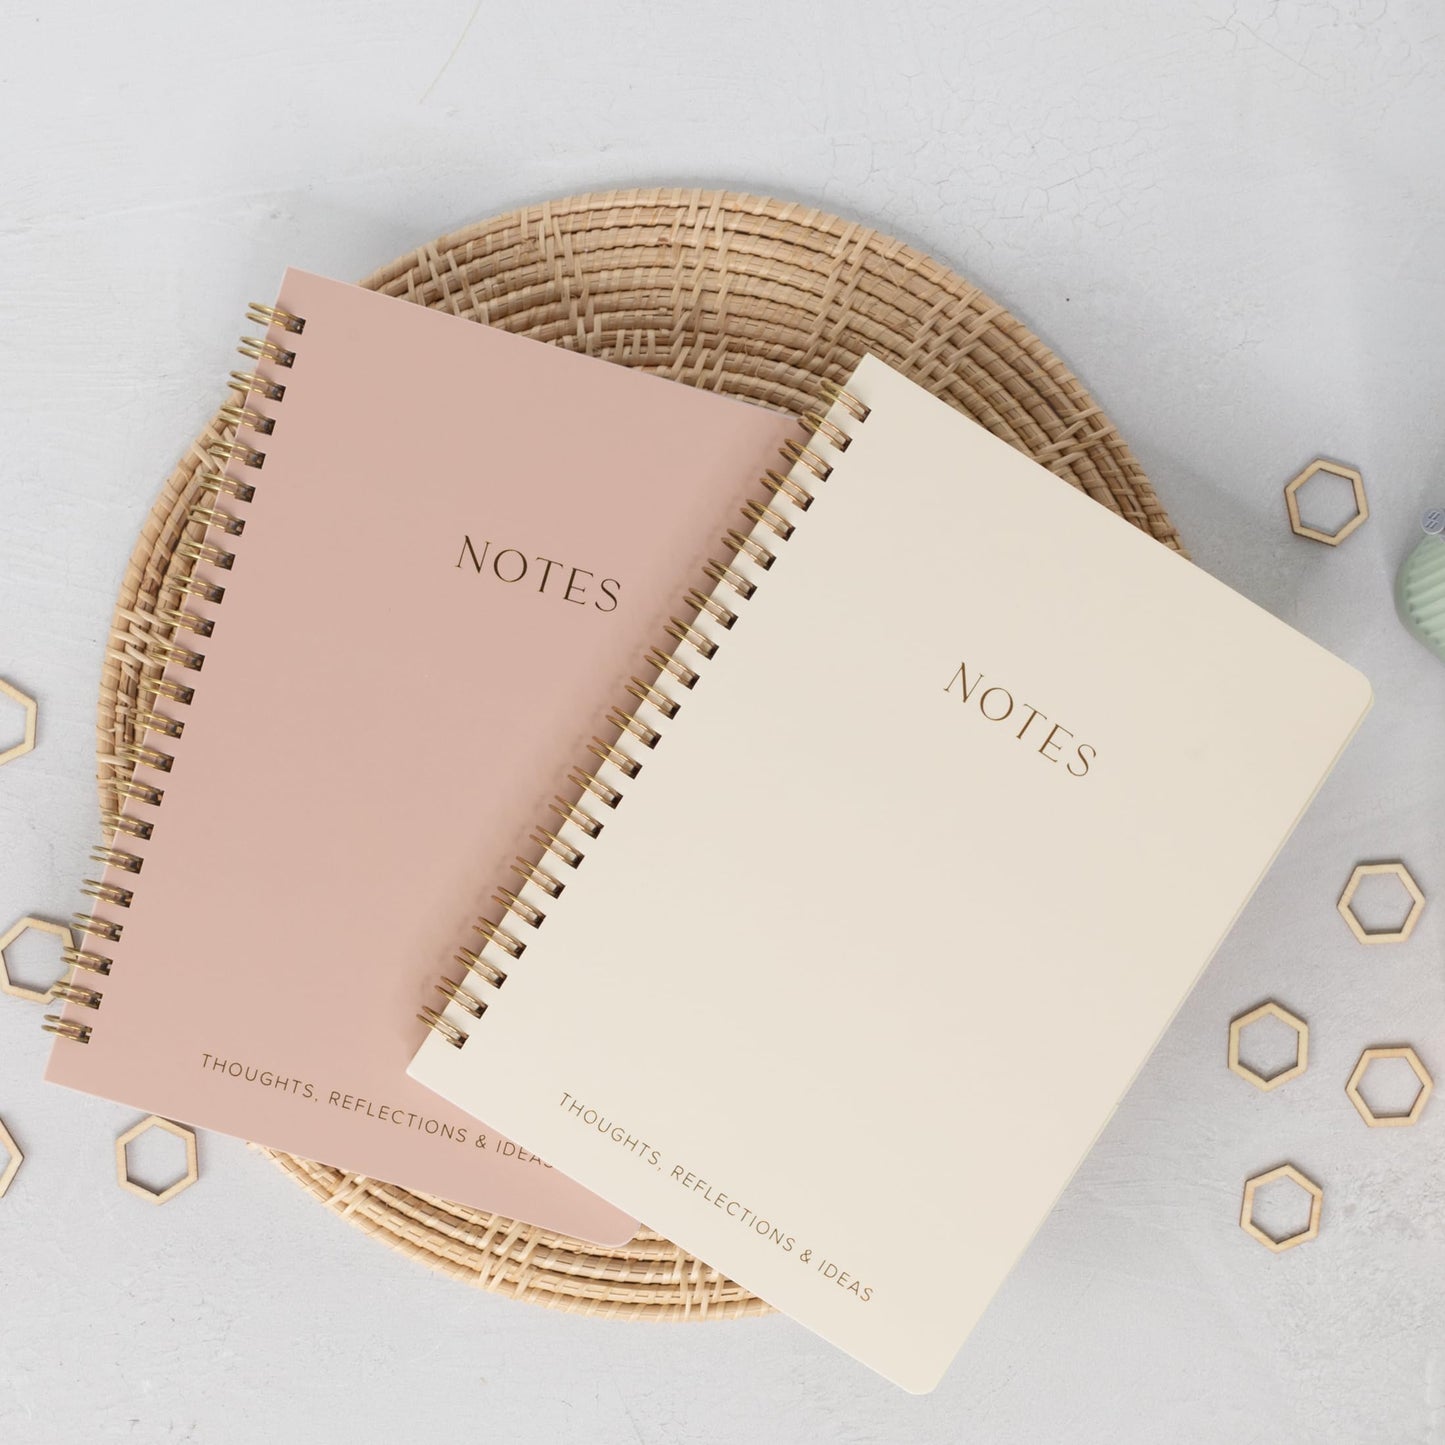 ZICOTO Aesthetic Spiral Notebook Set of 2 For Women and Men - Cute Ruled 8x6 Journal/Notebook with Pockets And Lined Pages - Perfect A5 Supplies to Stay Organized at Work or School